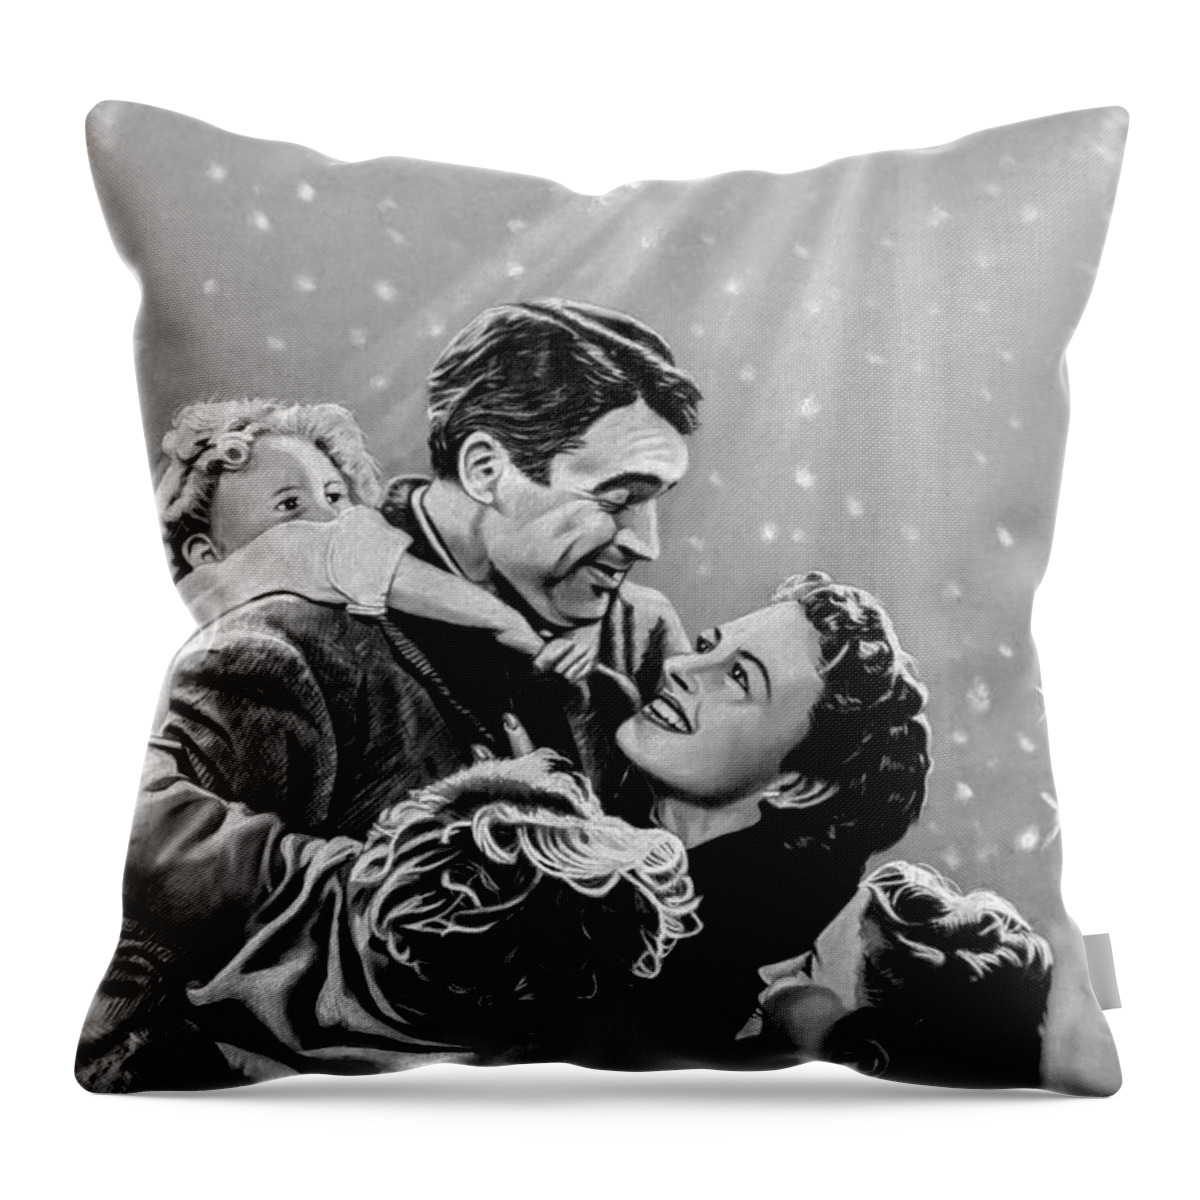 It's A Wonderful Life Throw Pillow featuring the drawing It's a Wonderful Life by JPW Artist